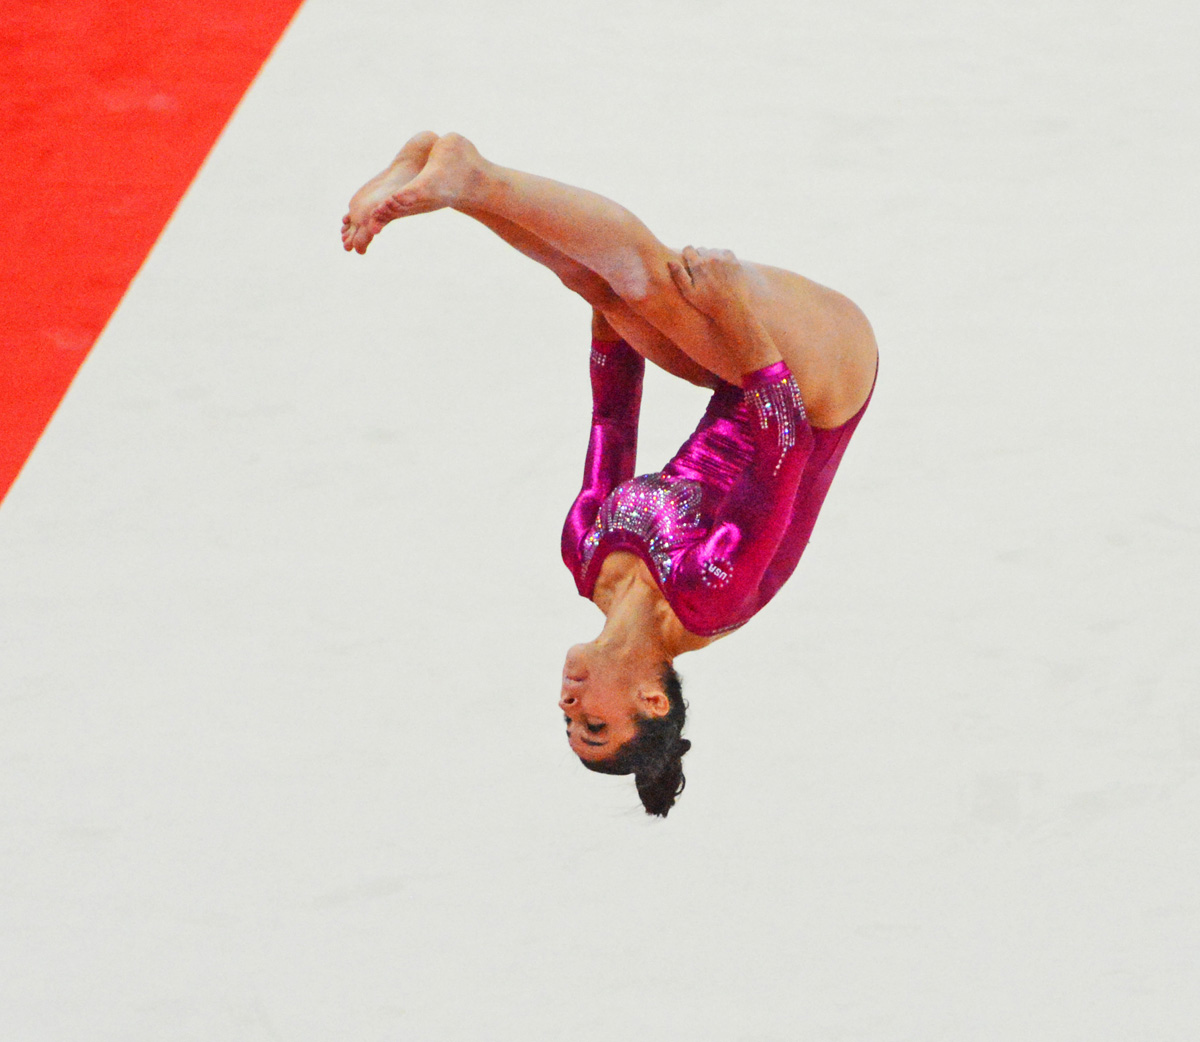 USA gymnast Aly Raisman showcasing her skills on the floor exercise during the 2012 Summer Olympics in London England.